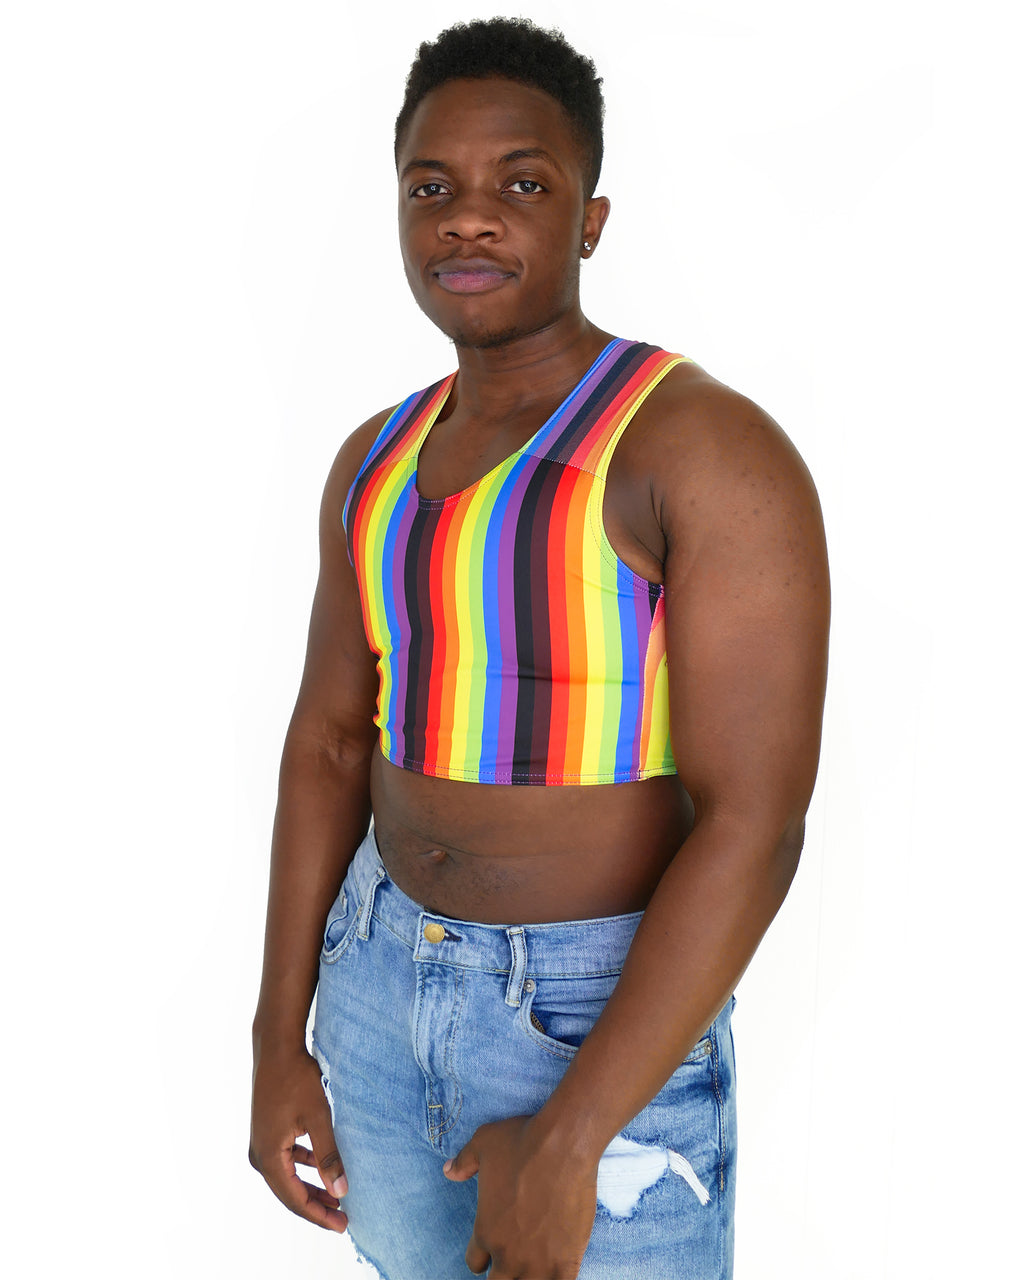 The Perfect Binder: The GC2B Reviewed